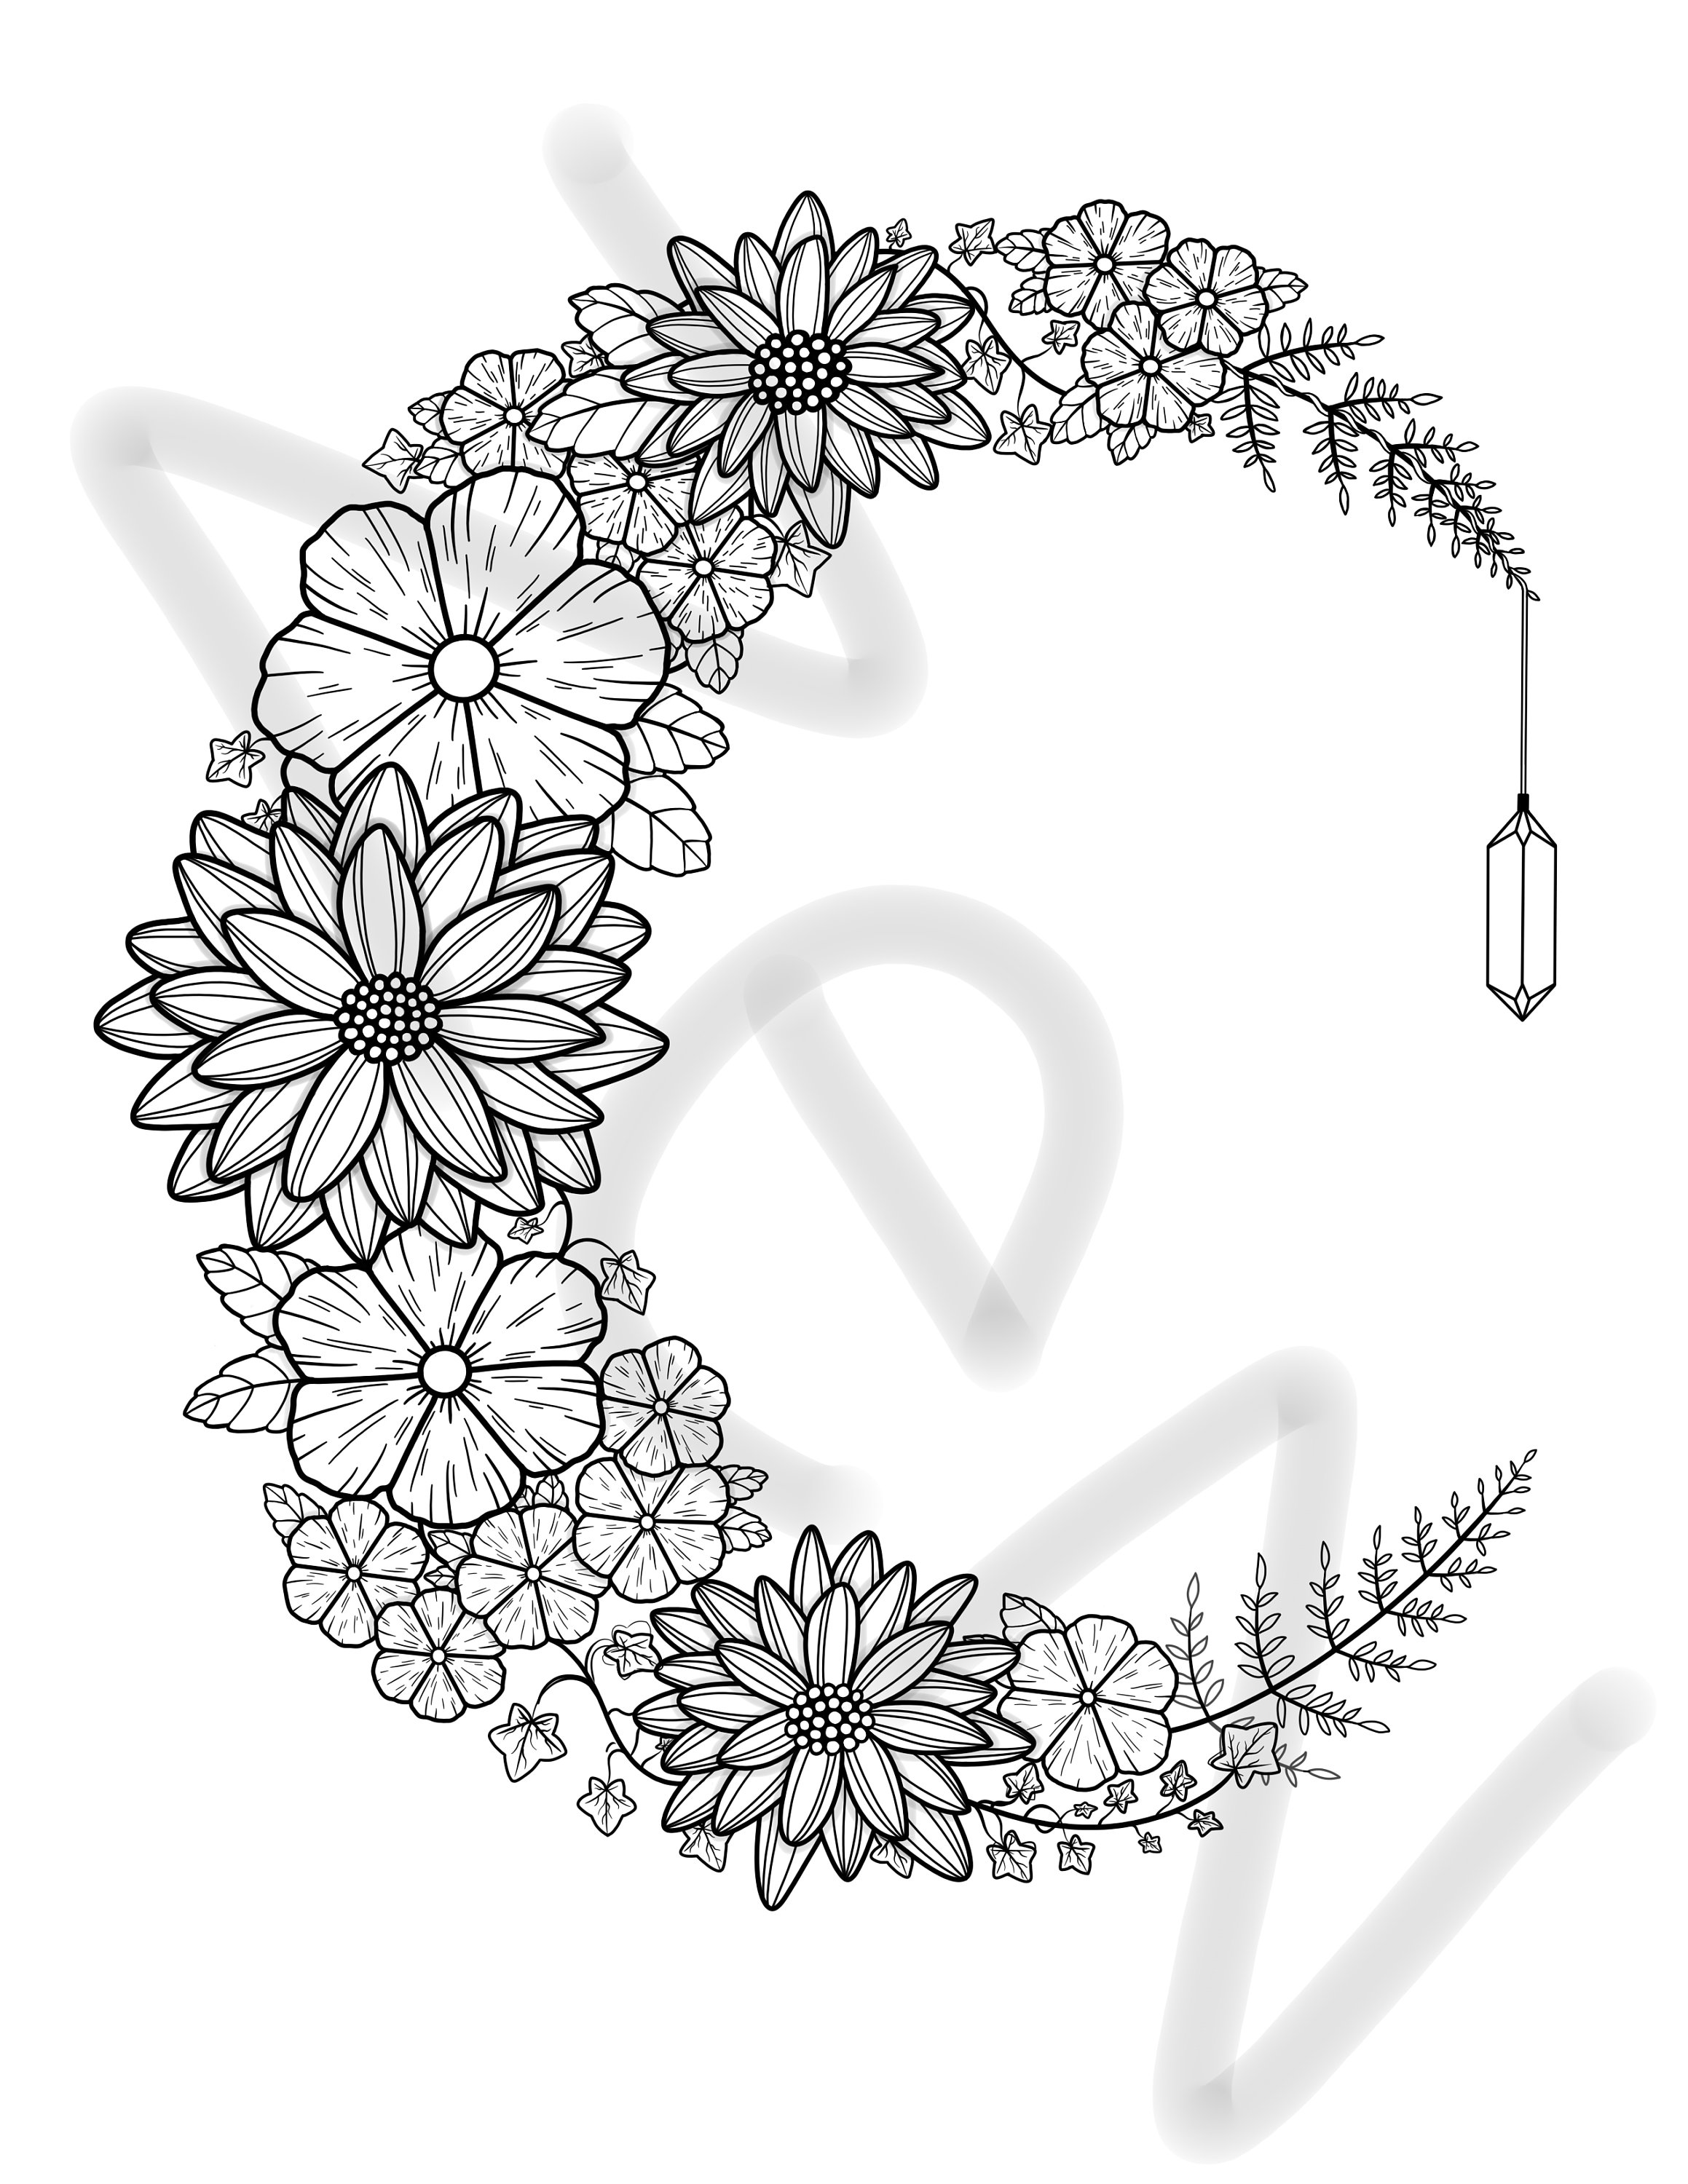 Floral moon printable coloring page printable adult coloring pages floral coloring sheets flower coloring page for adults stress relief